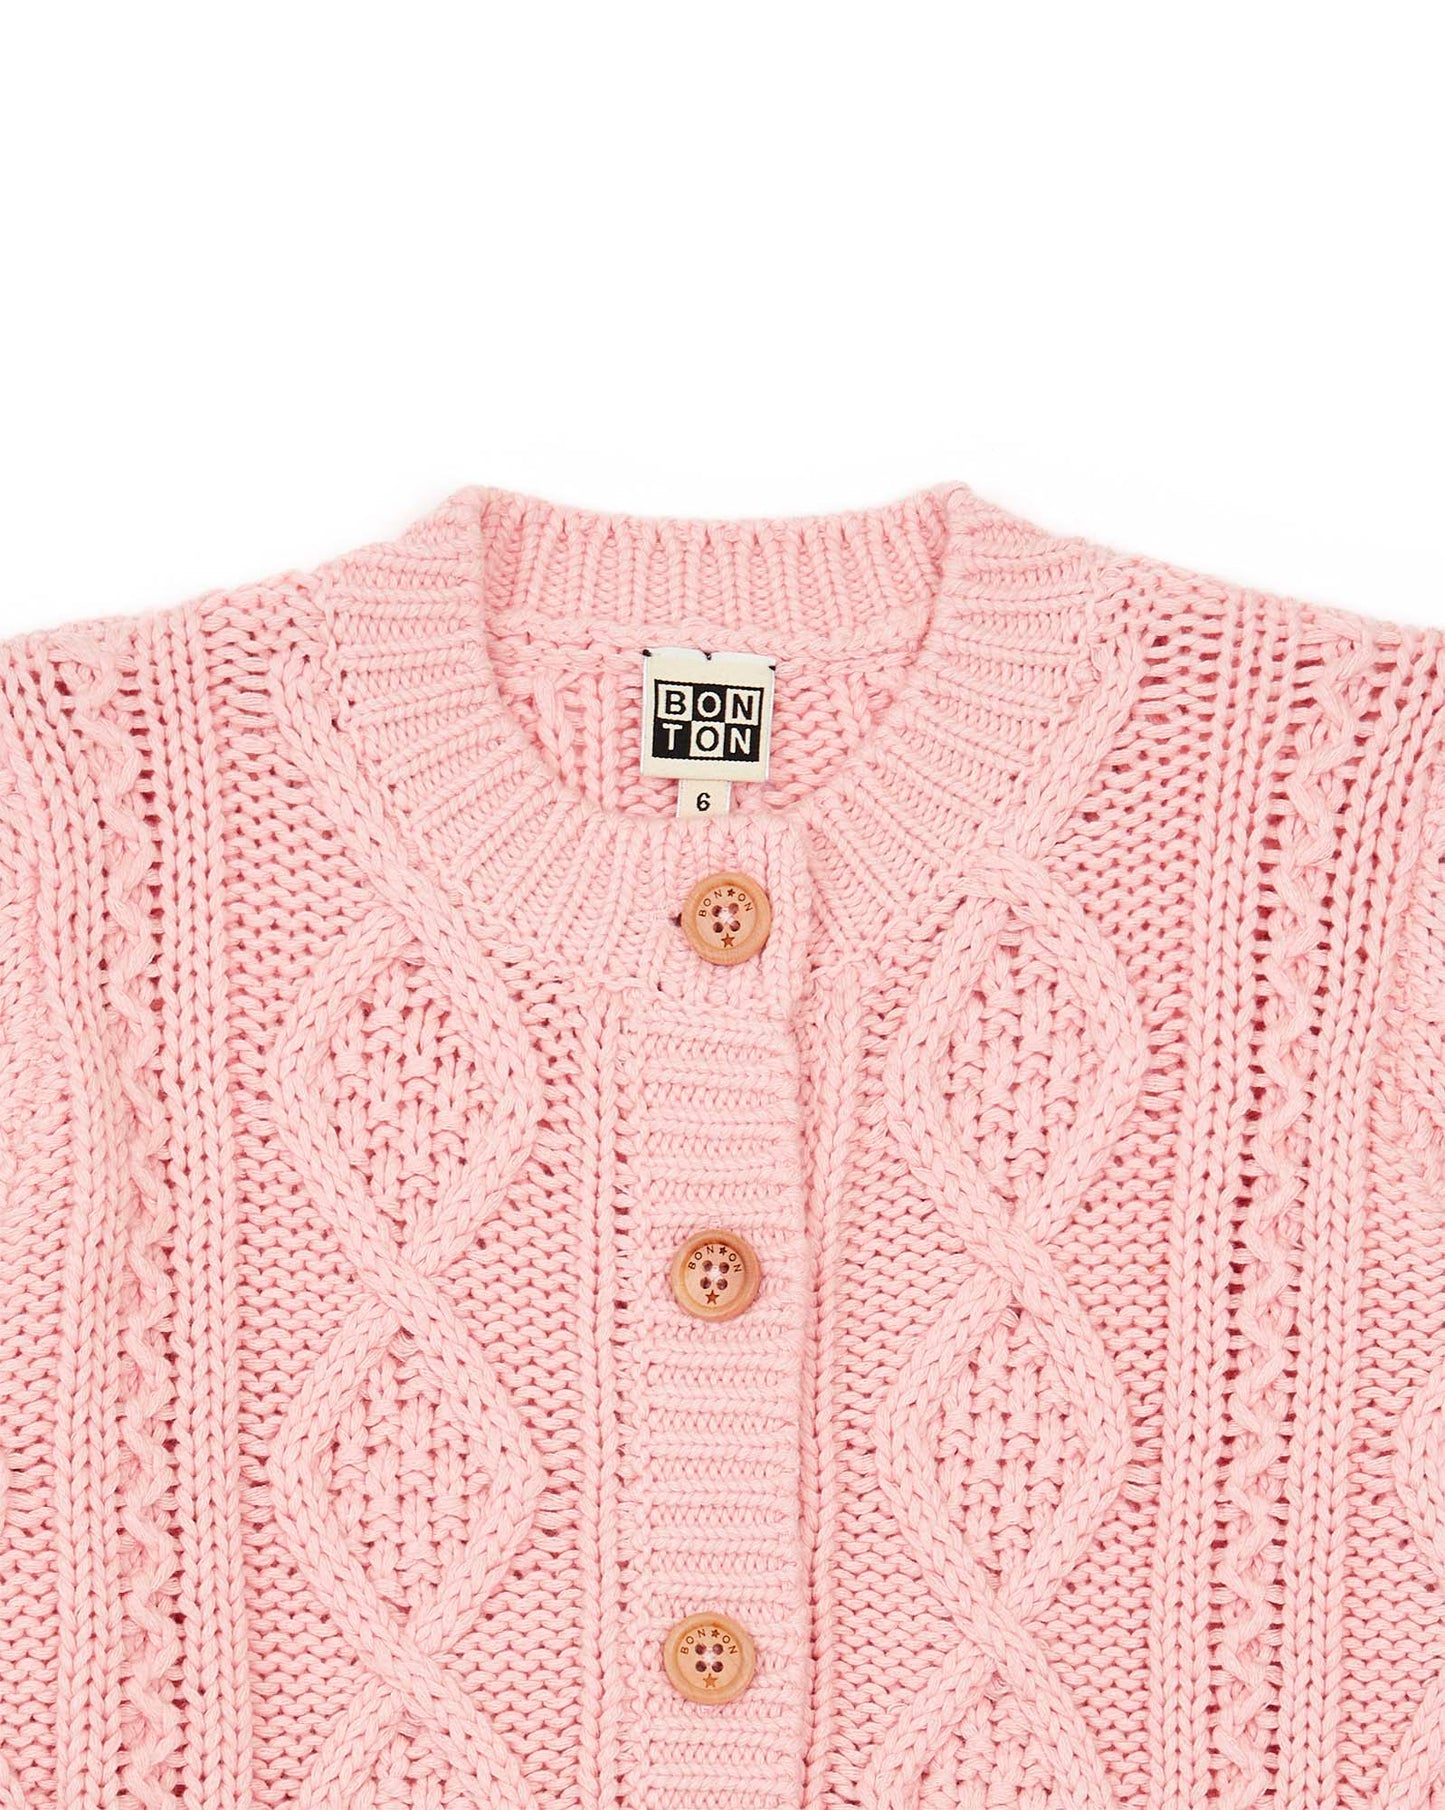 Cardigan - Tiffany rose coton maille ajourée